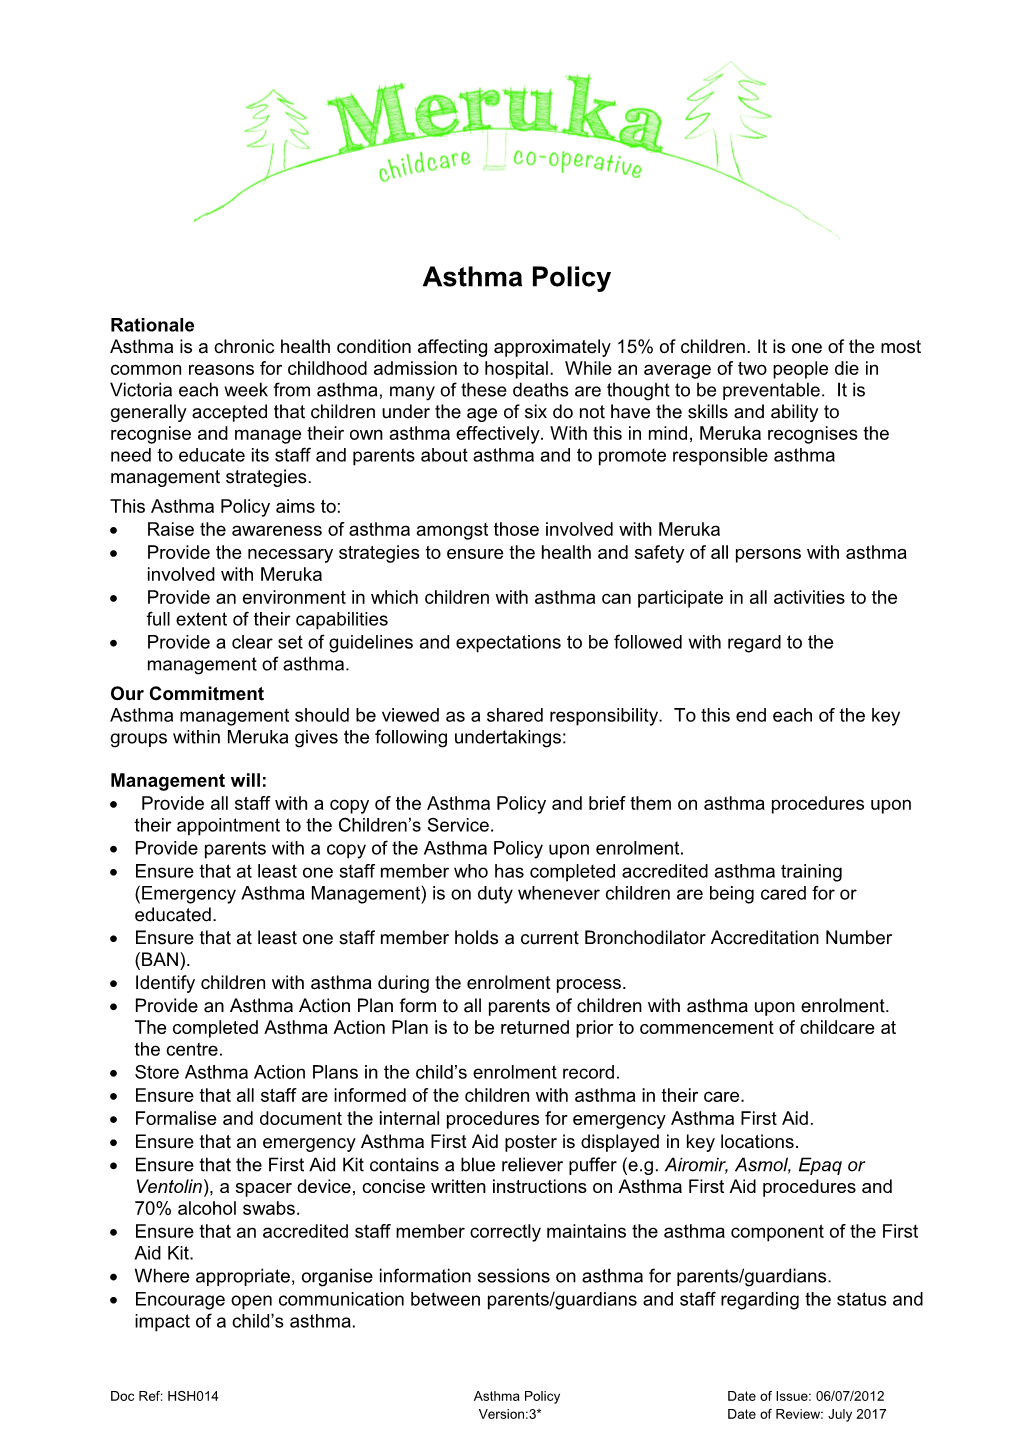 This Asthma Policy Aims To